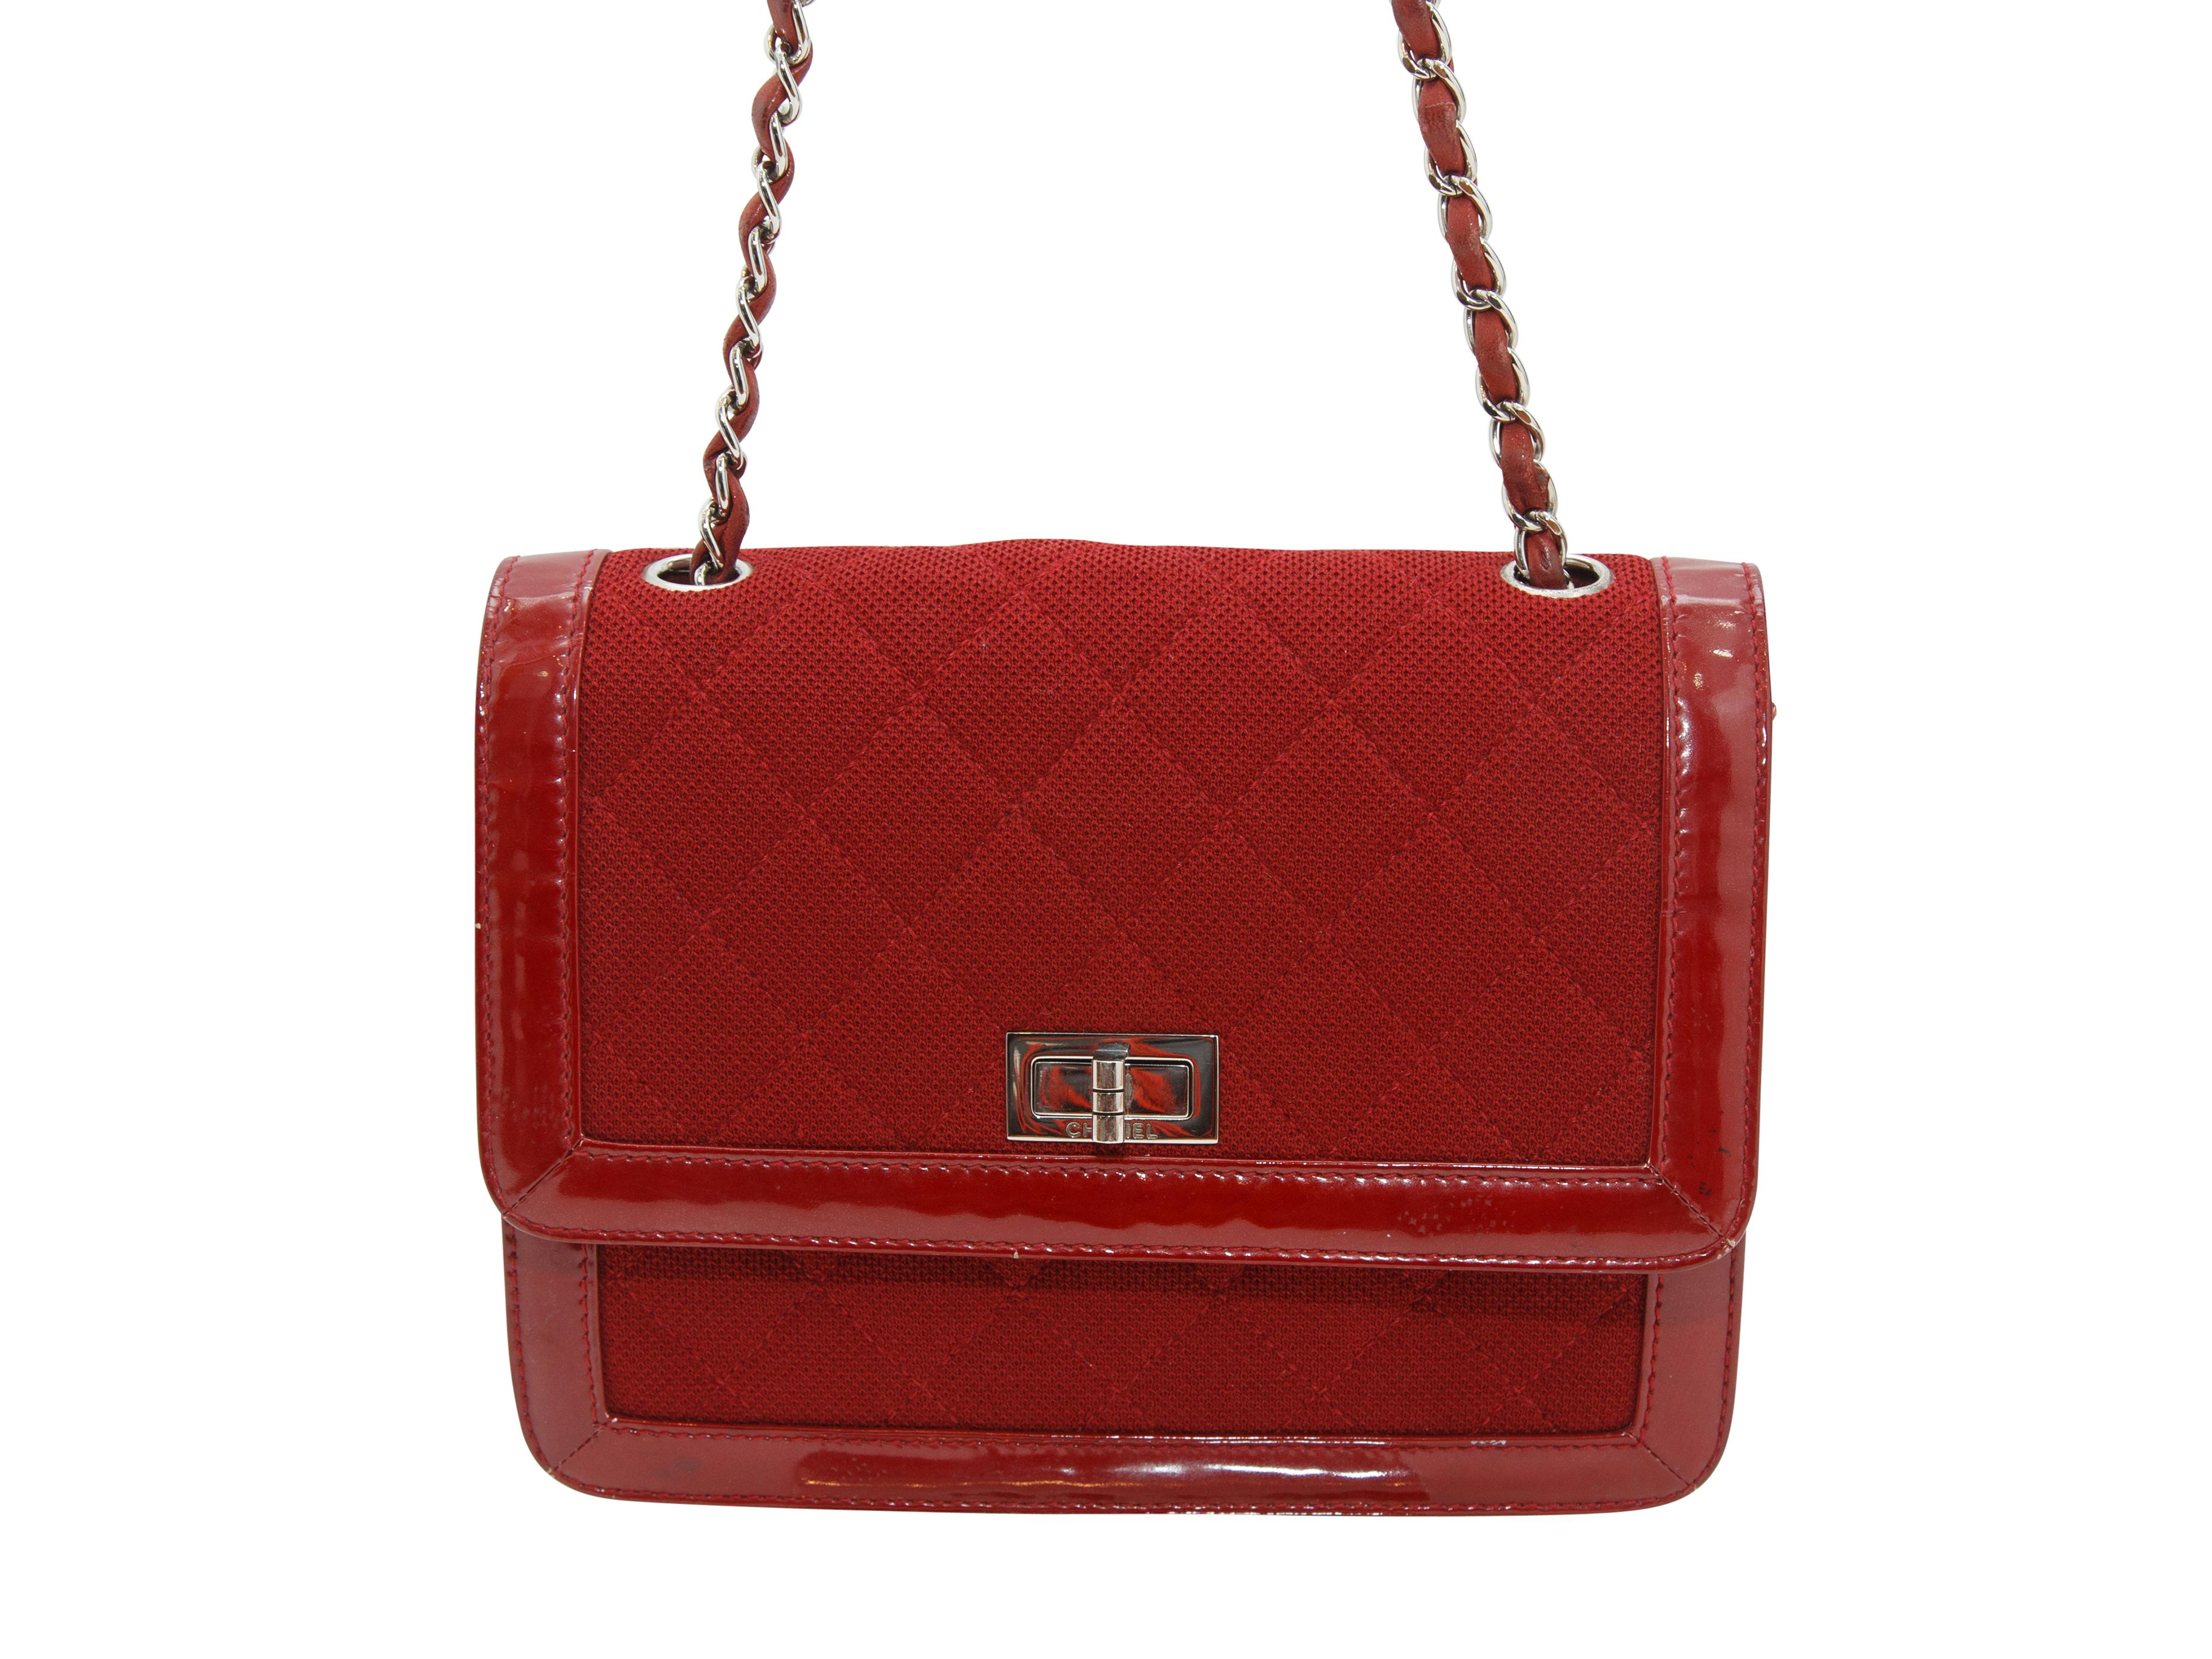 Product details: Red Reissue cloth and patent-trimmed bag by Chanel. Silver-tone hardware. Chain-link strap. Turn-lock closure at front. 9